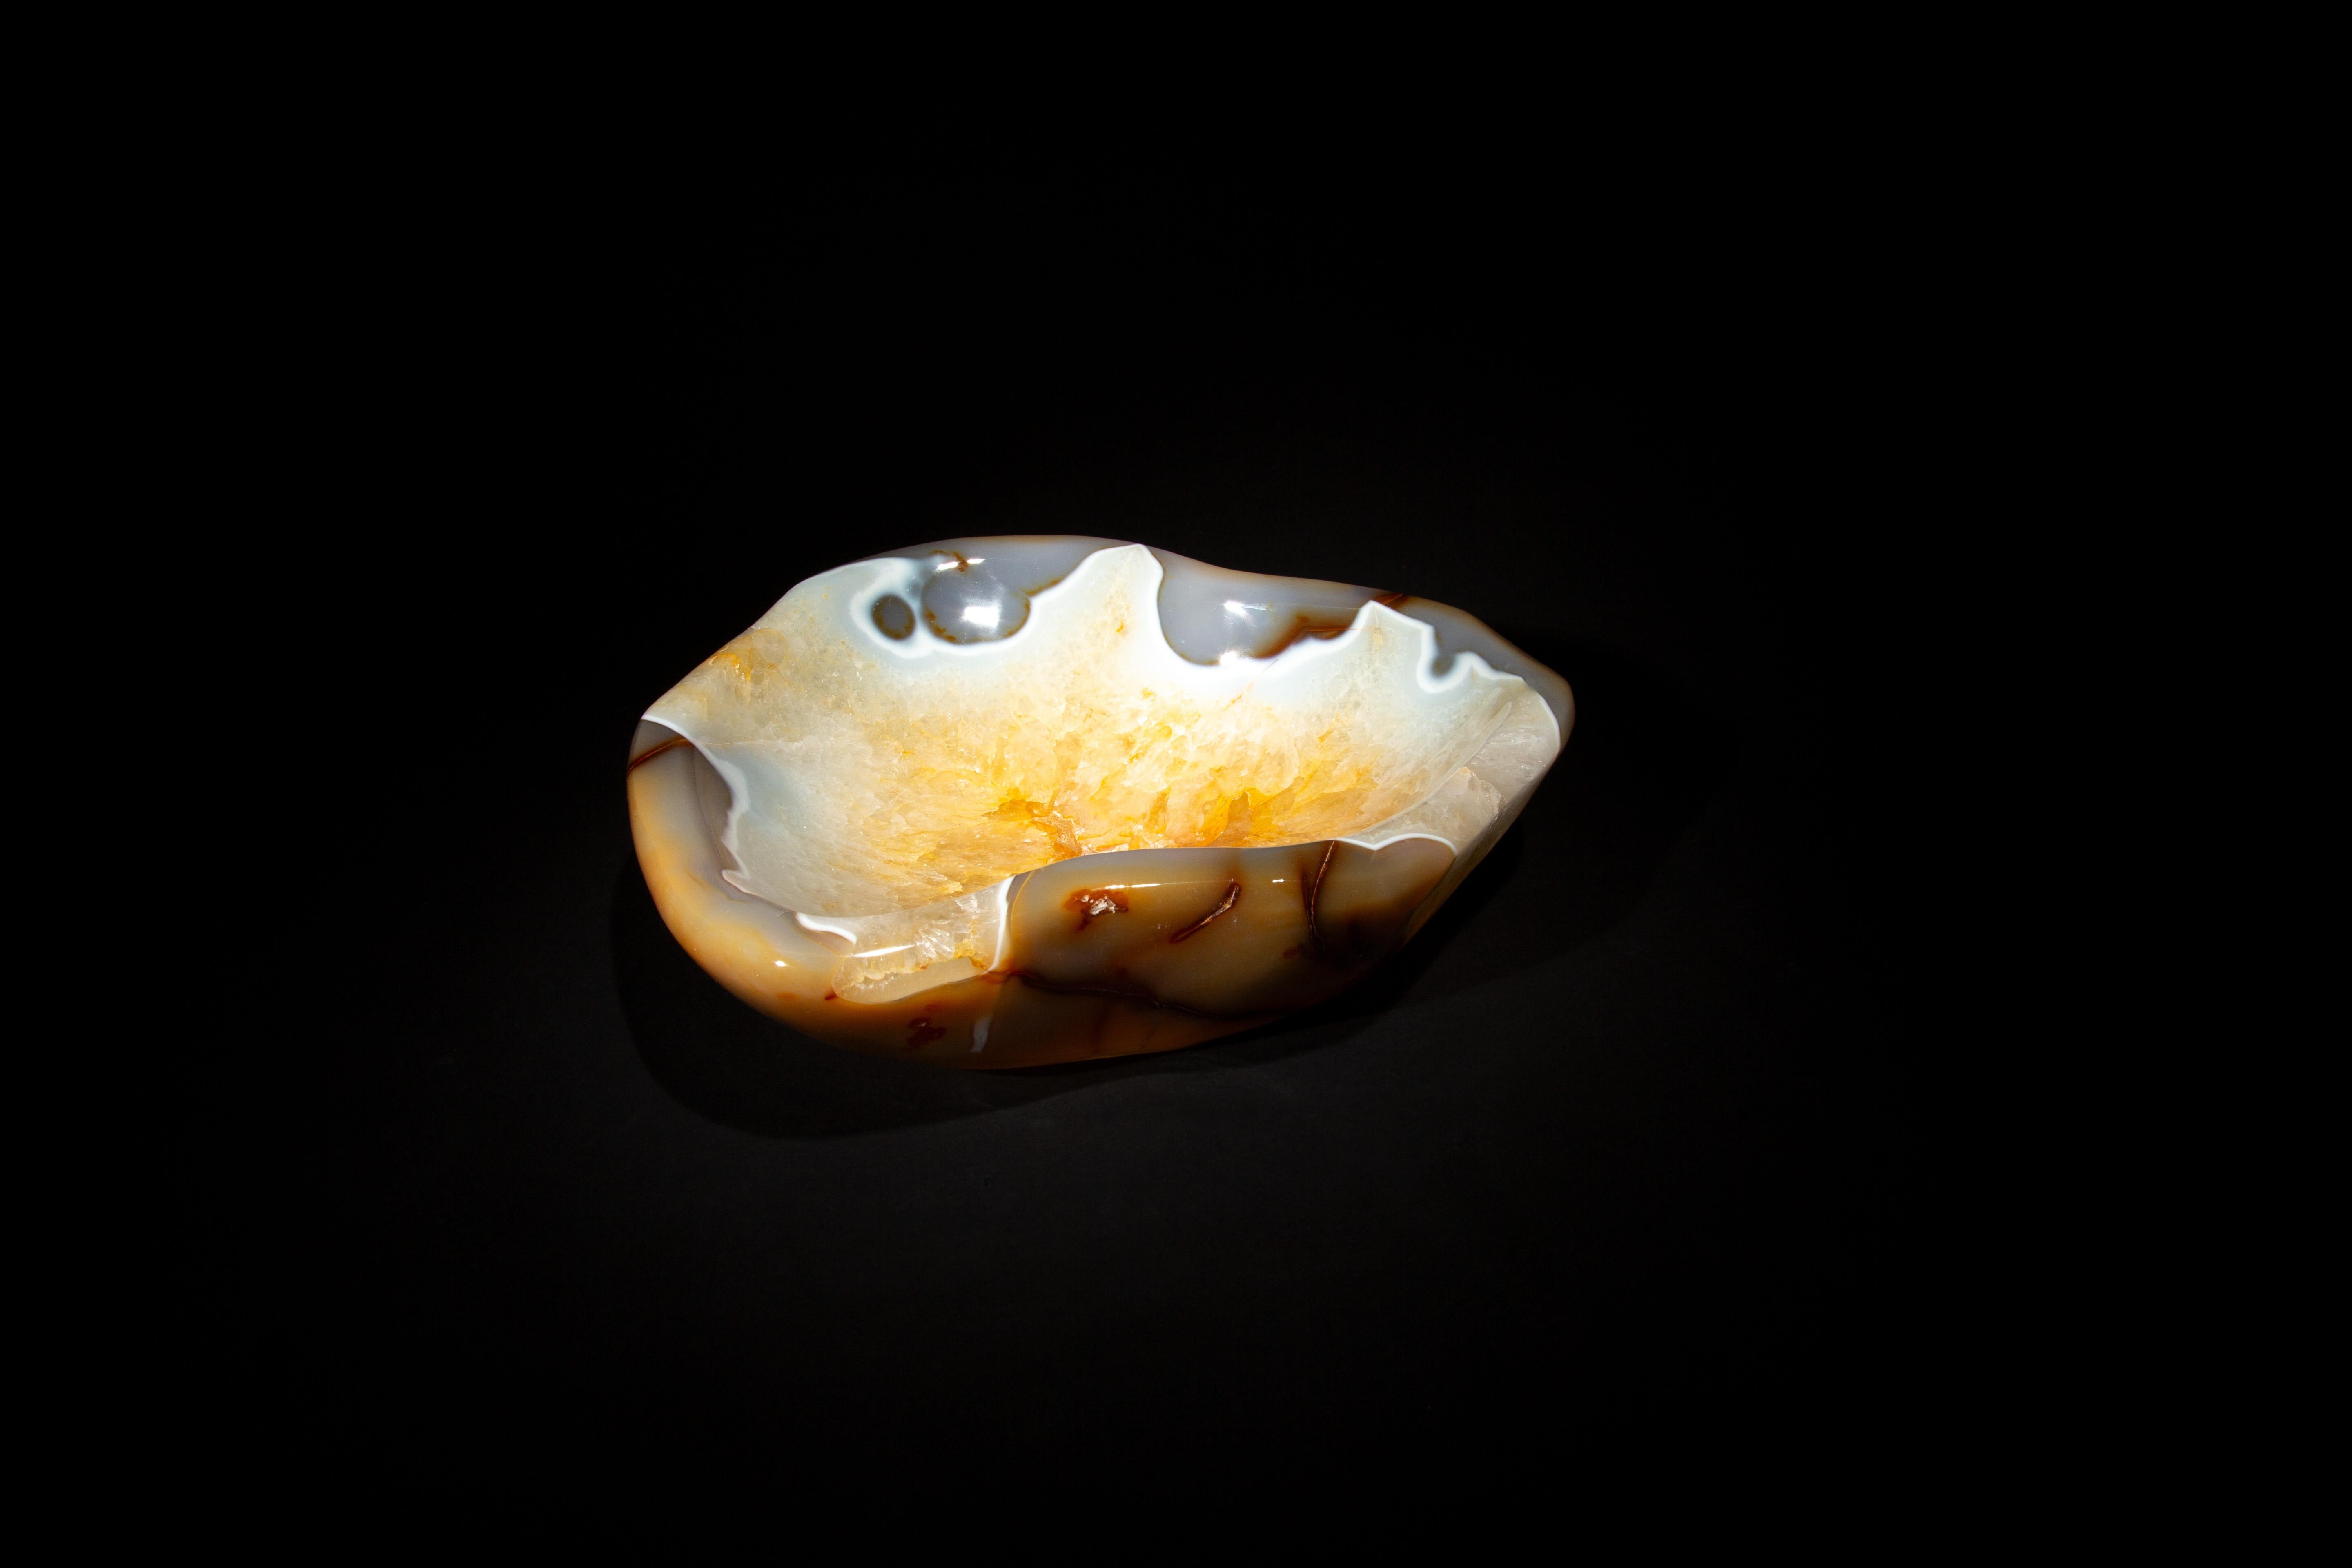 This Agate and Quartz Bowl combines the unique beauty of natural stones in an elegant design. With dimensions of 10.5 inches by 9 inches and a depth of 2.5 inches, it features a harmonious blend of agate's striking bands and a luminous quartz